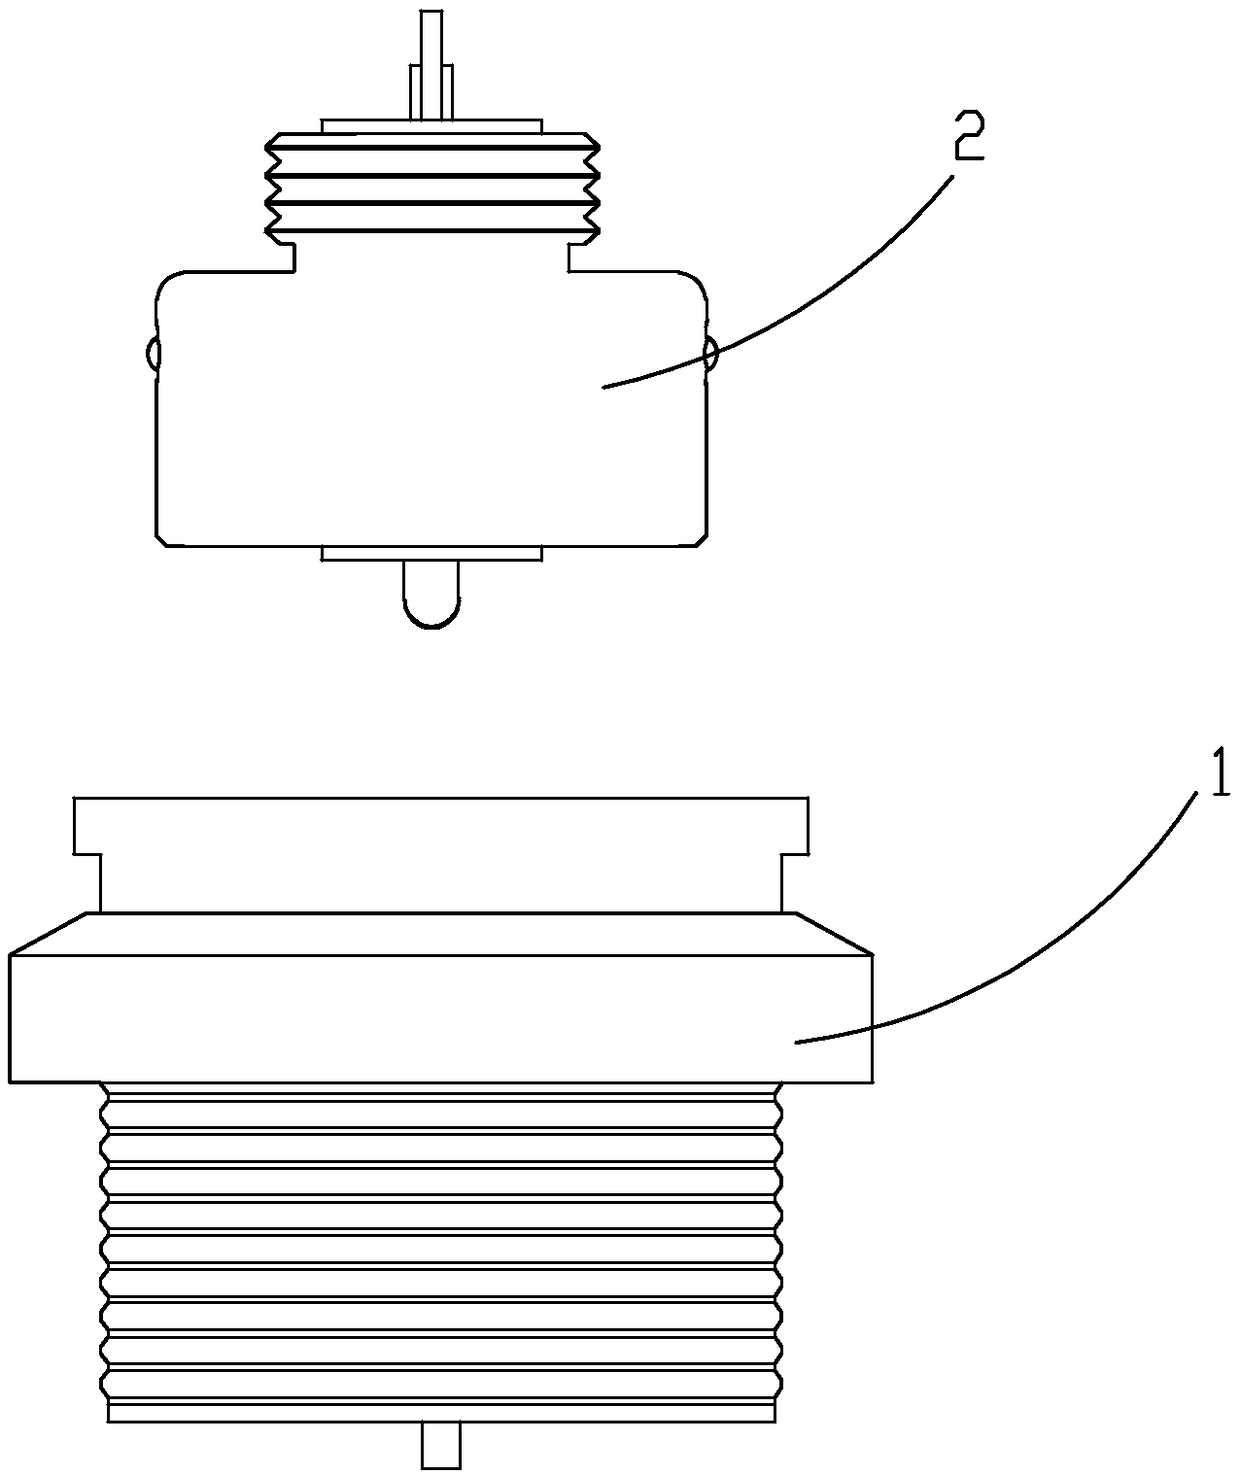 Magnetic attraction connector of lamp